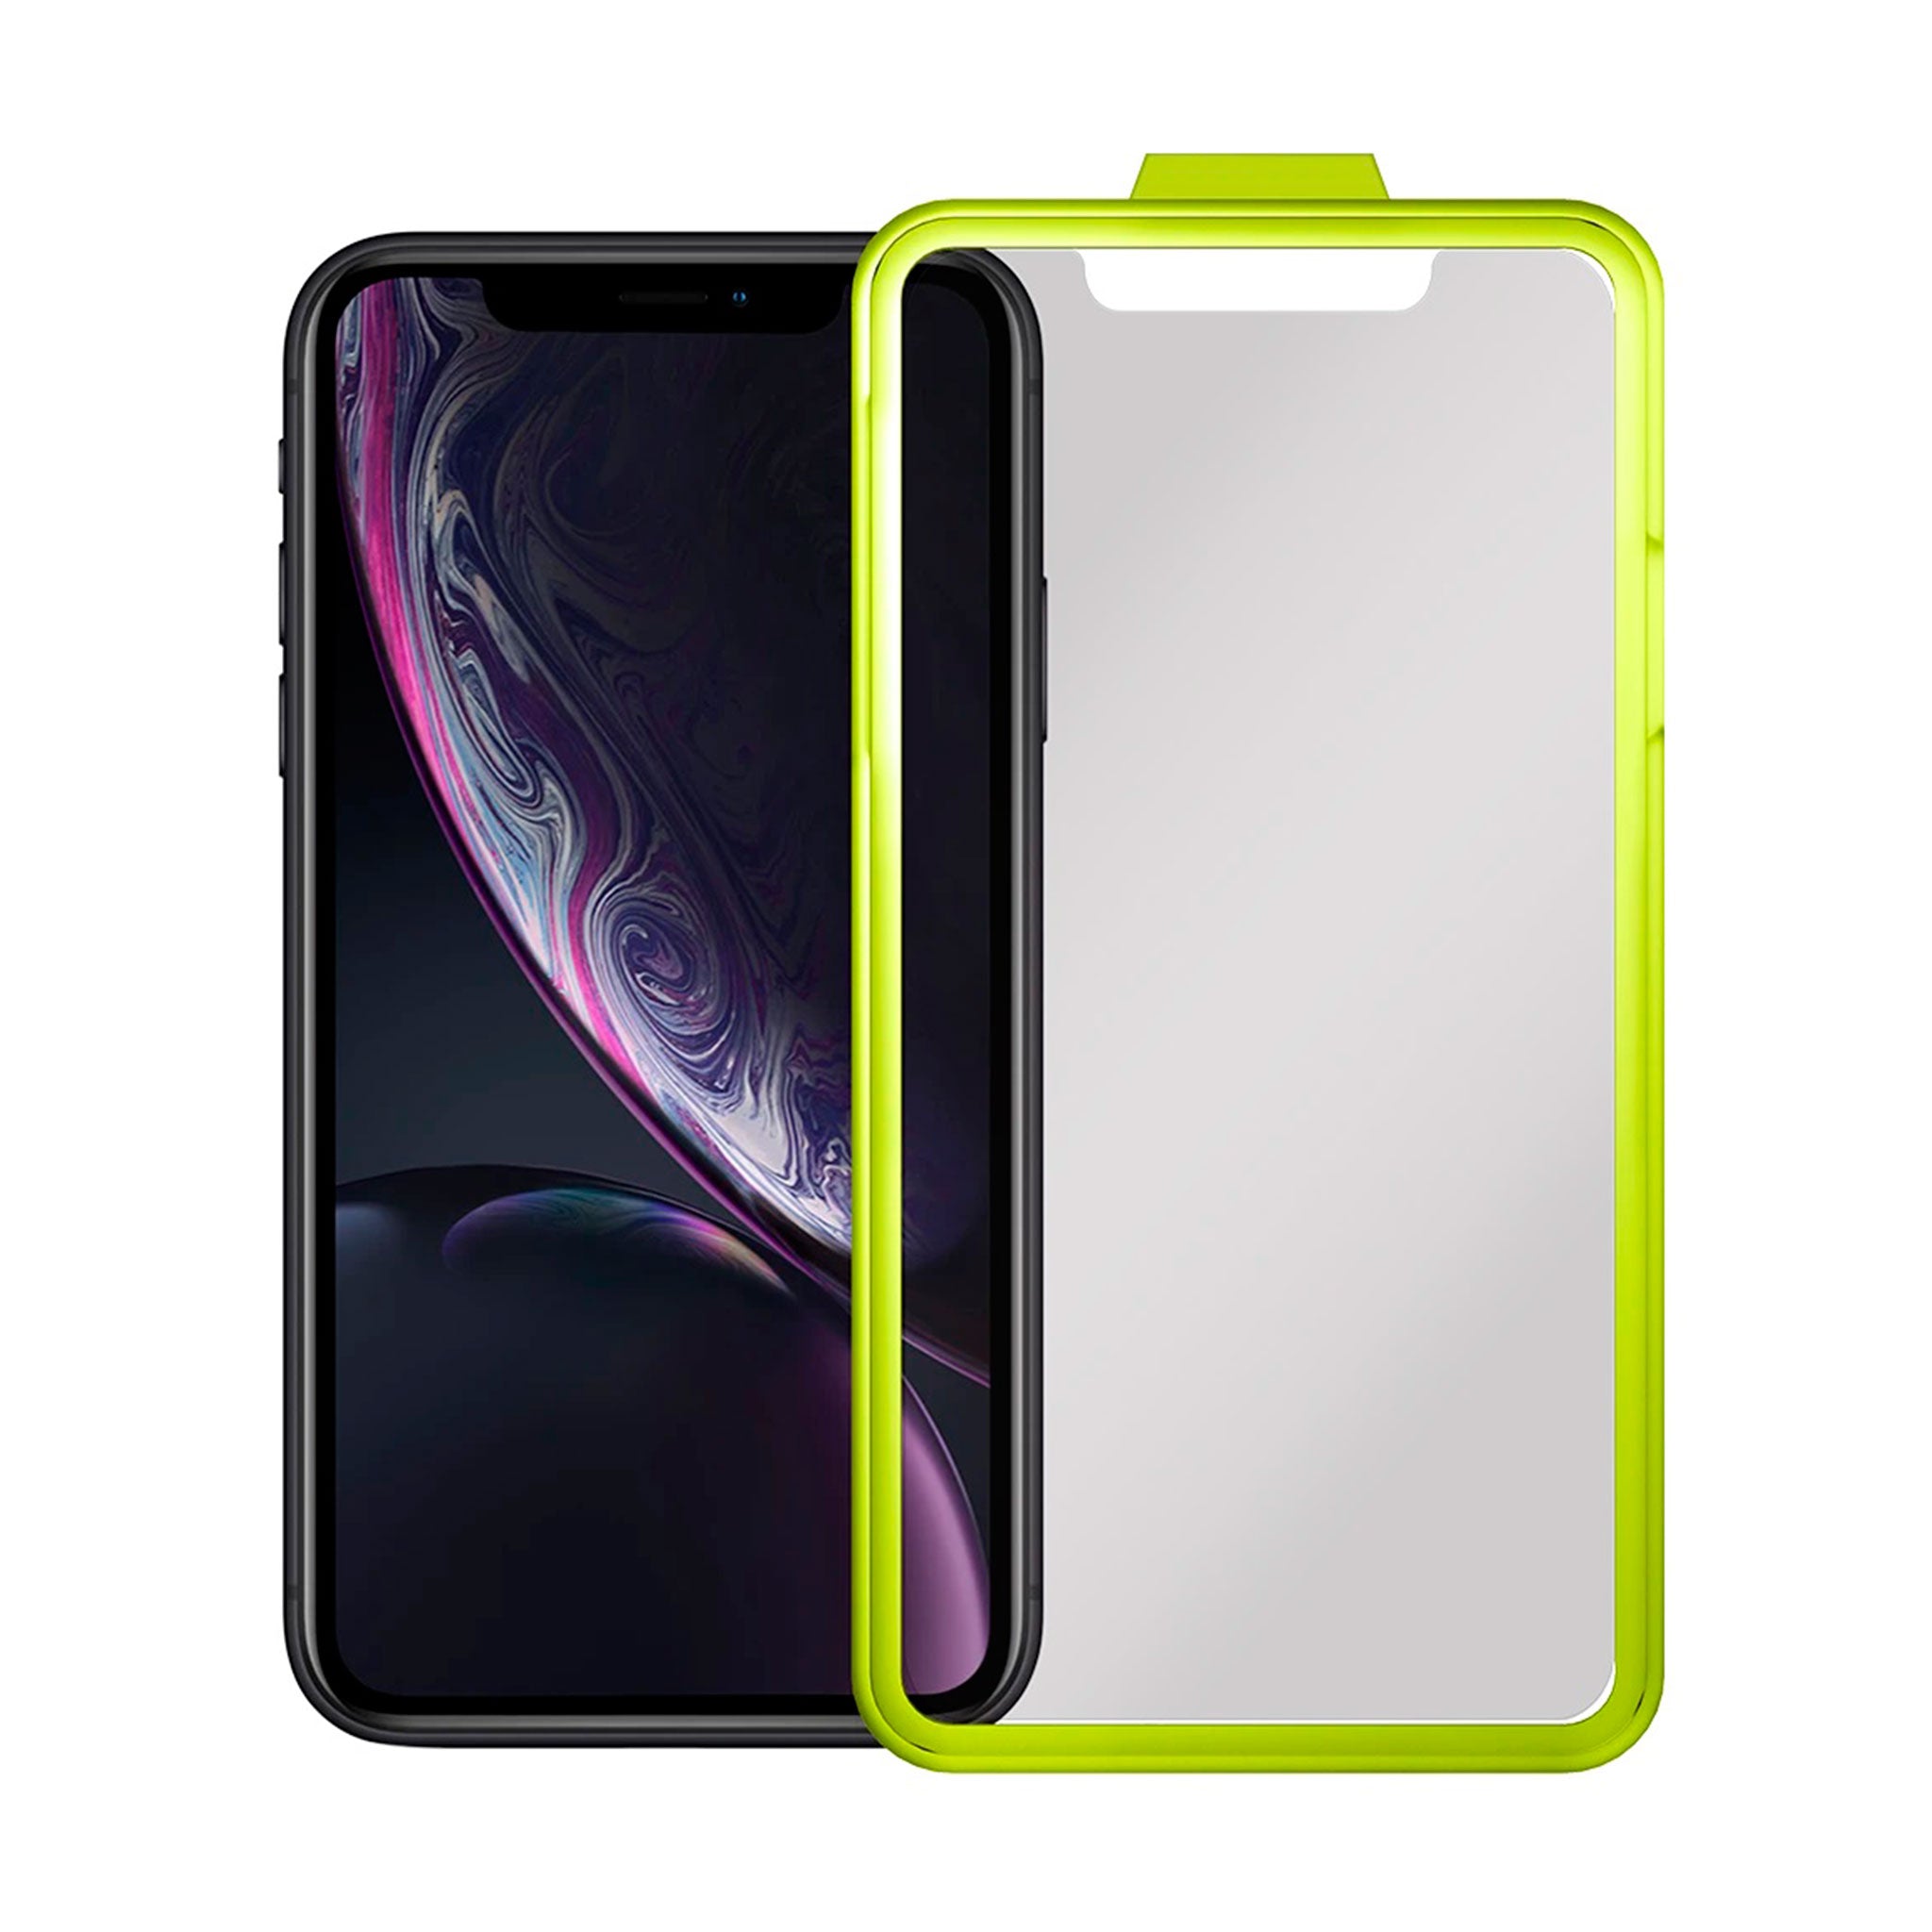 Fortress - Level Focus $200 Oath Glass Screen Protector For Apple Iphone 11 / Xr - Clear